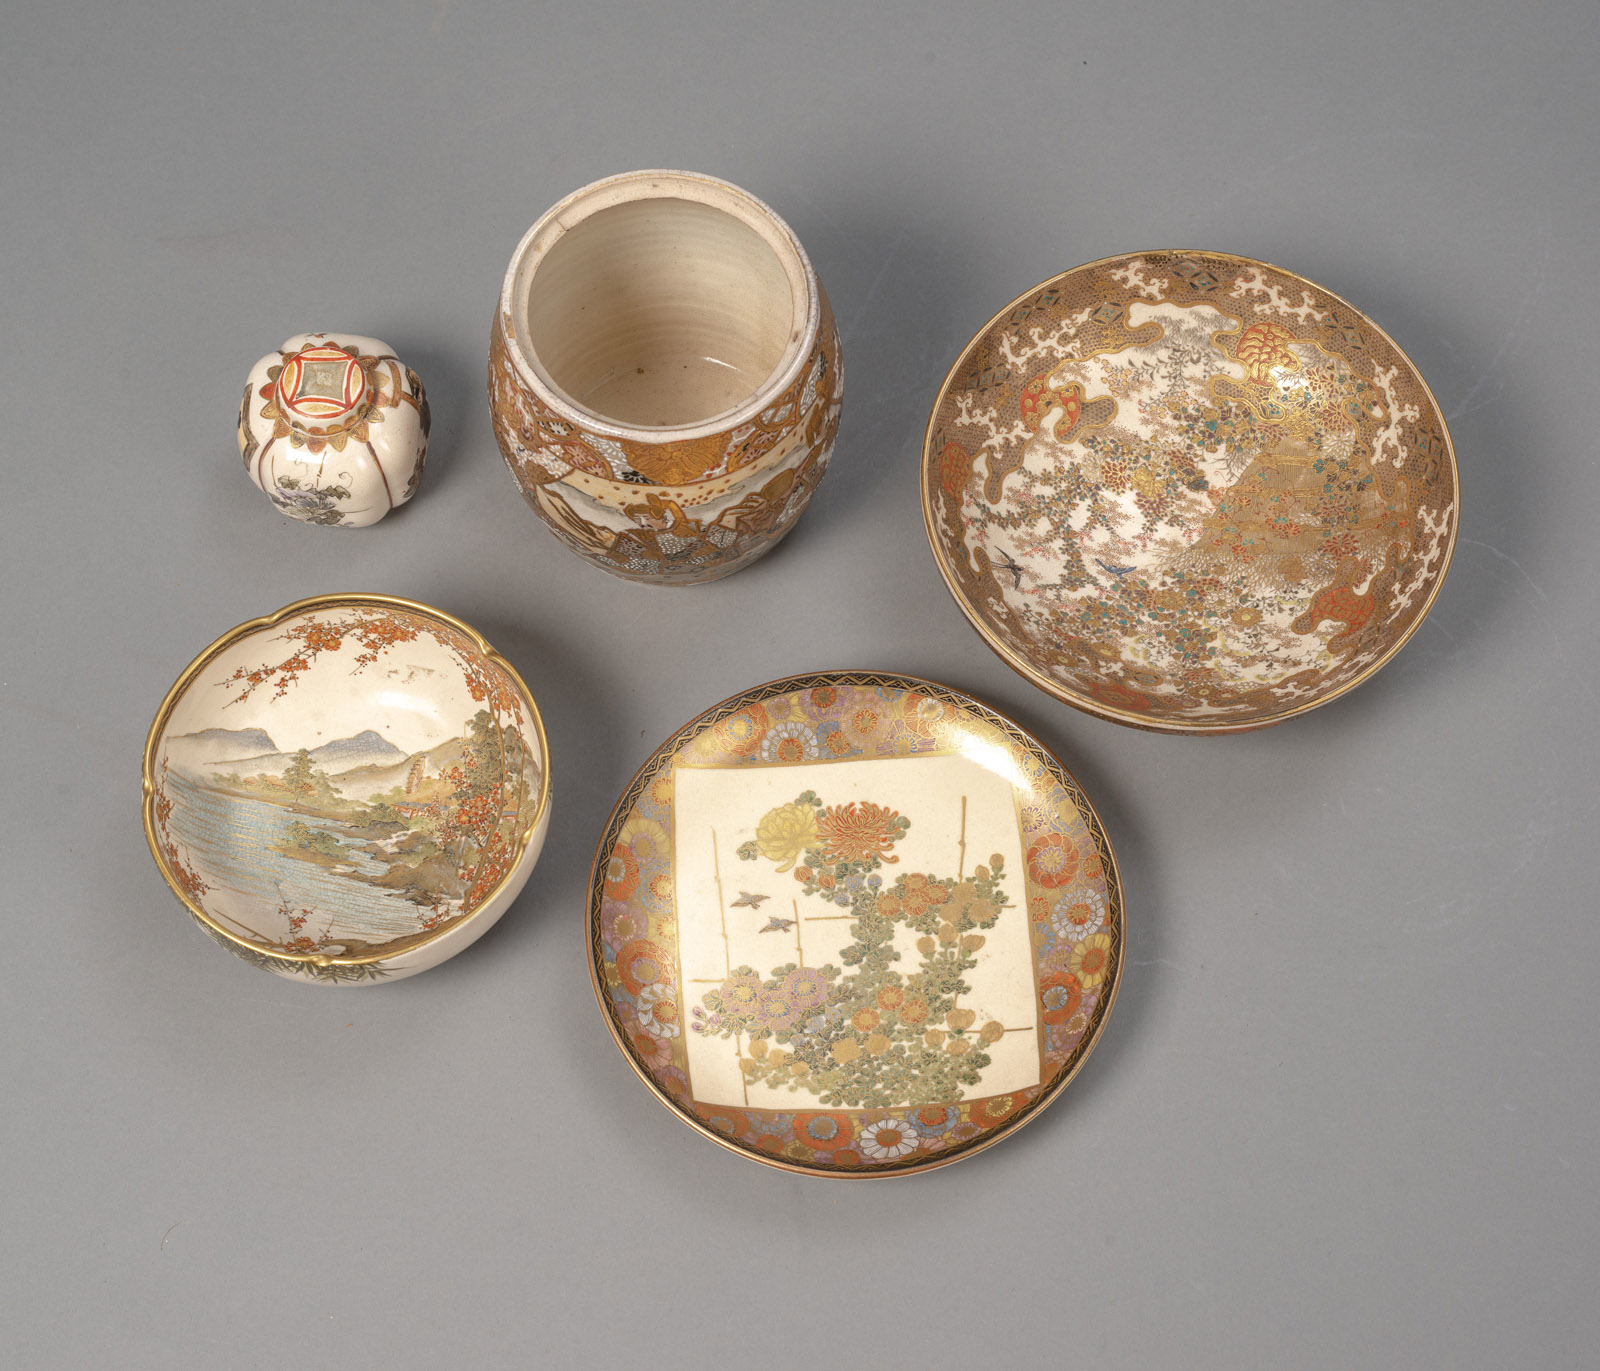 FÜNF SATSUMA STONEWARE: TWO BOWLS, A DISH, A VASE AND A SMALL LIDDED VASE - Image 2 of 3